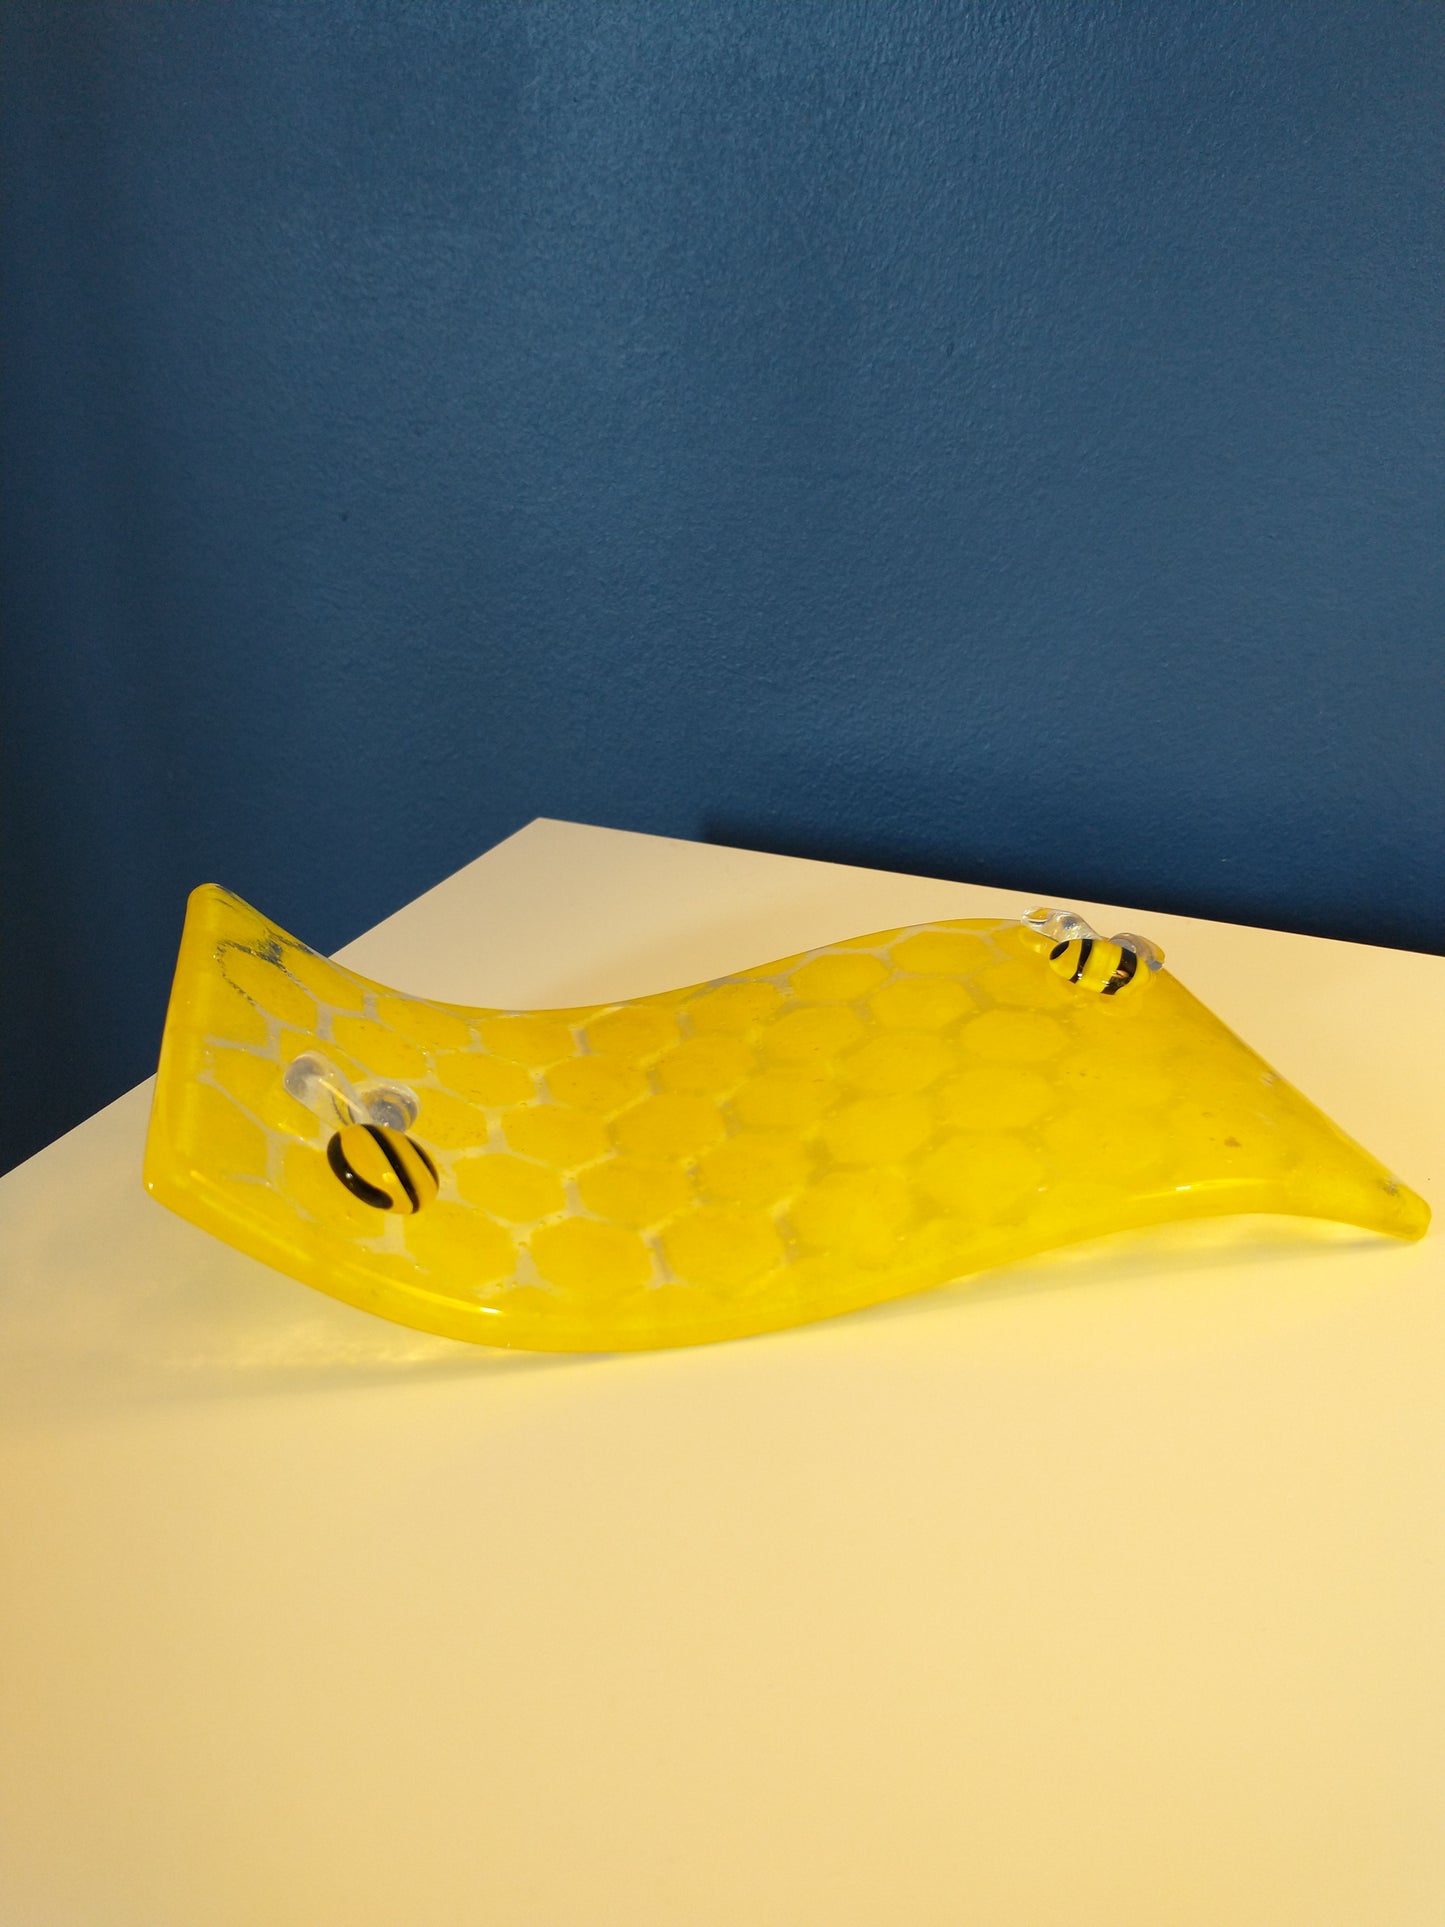 Fused glass bee and honeycomb decorative display